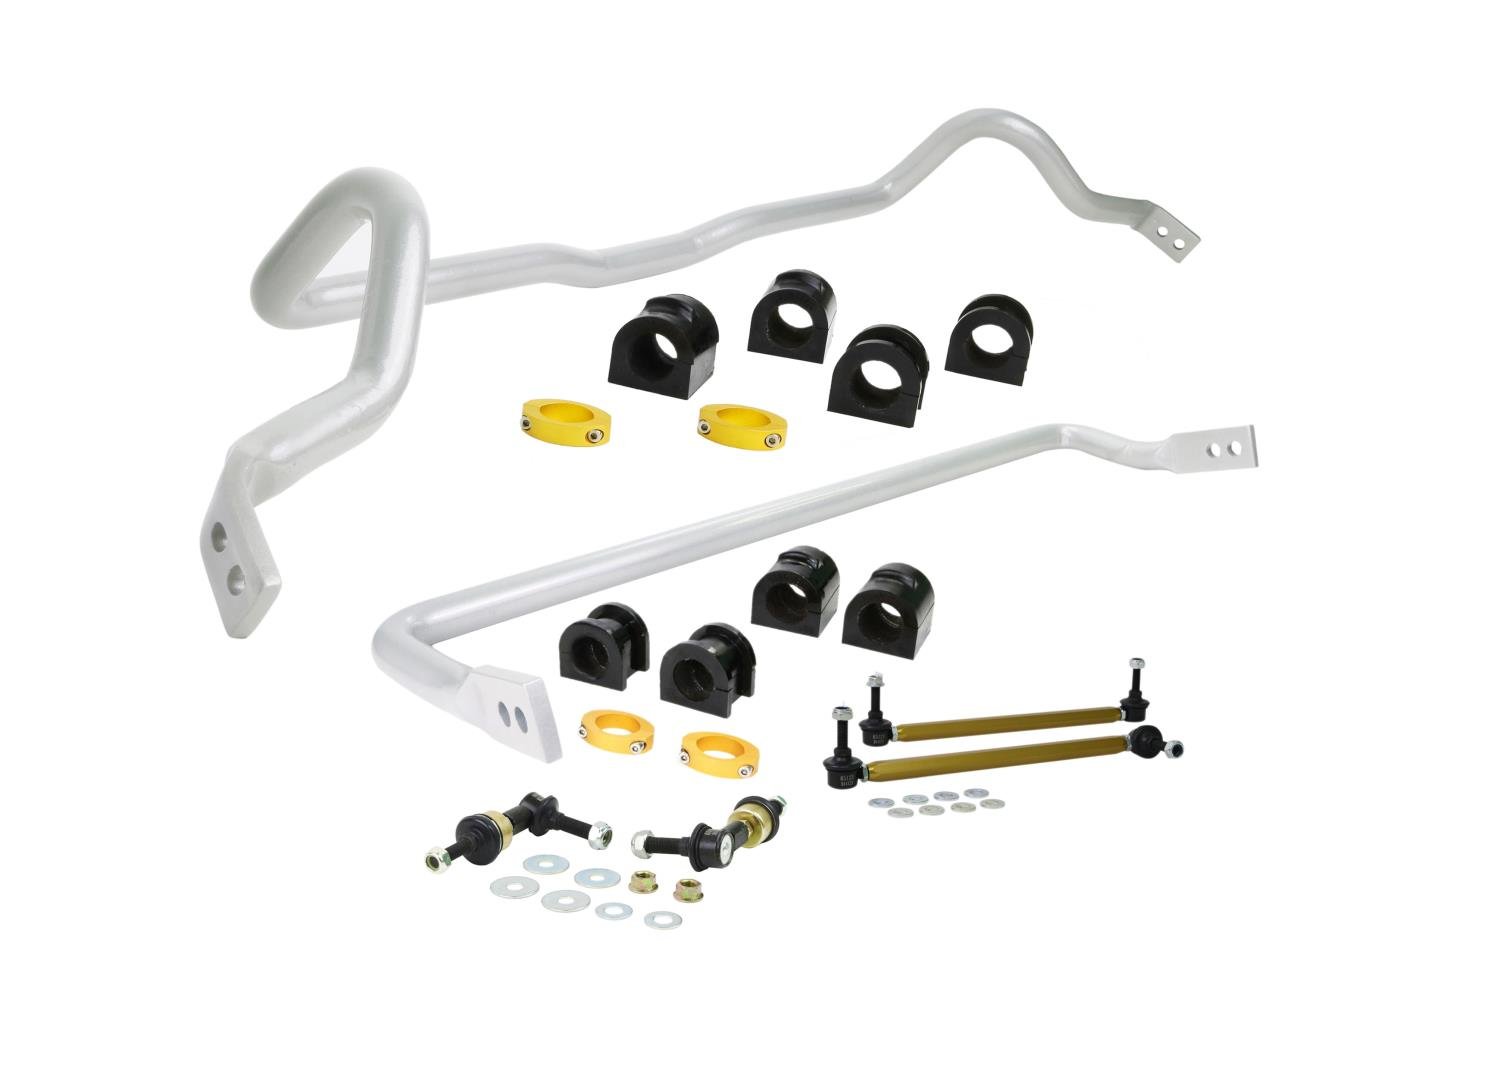 BMK001 Front and Rear Sway Bar Kit for 2007-2009 Mazda Speed 3